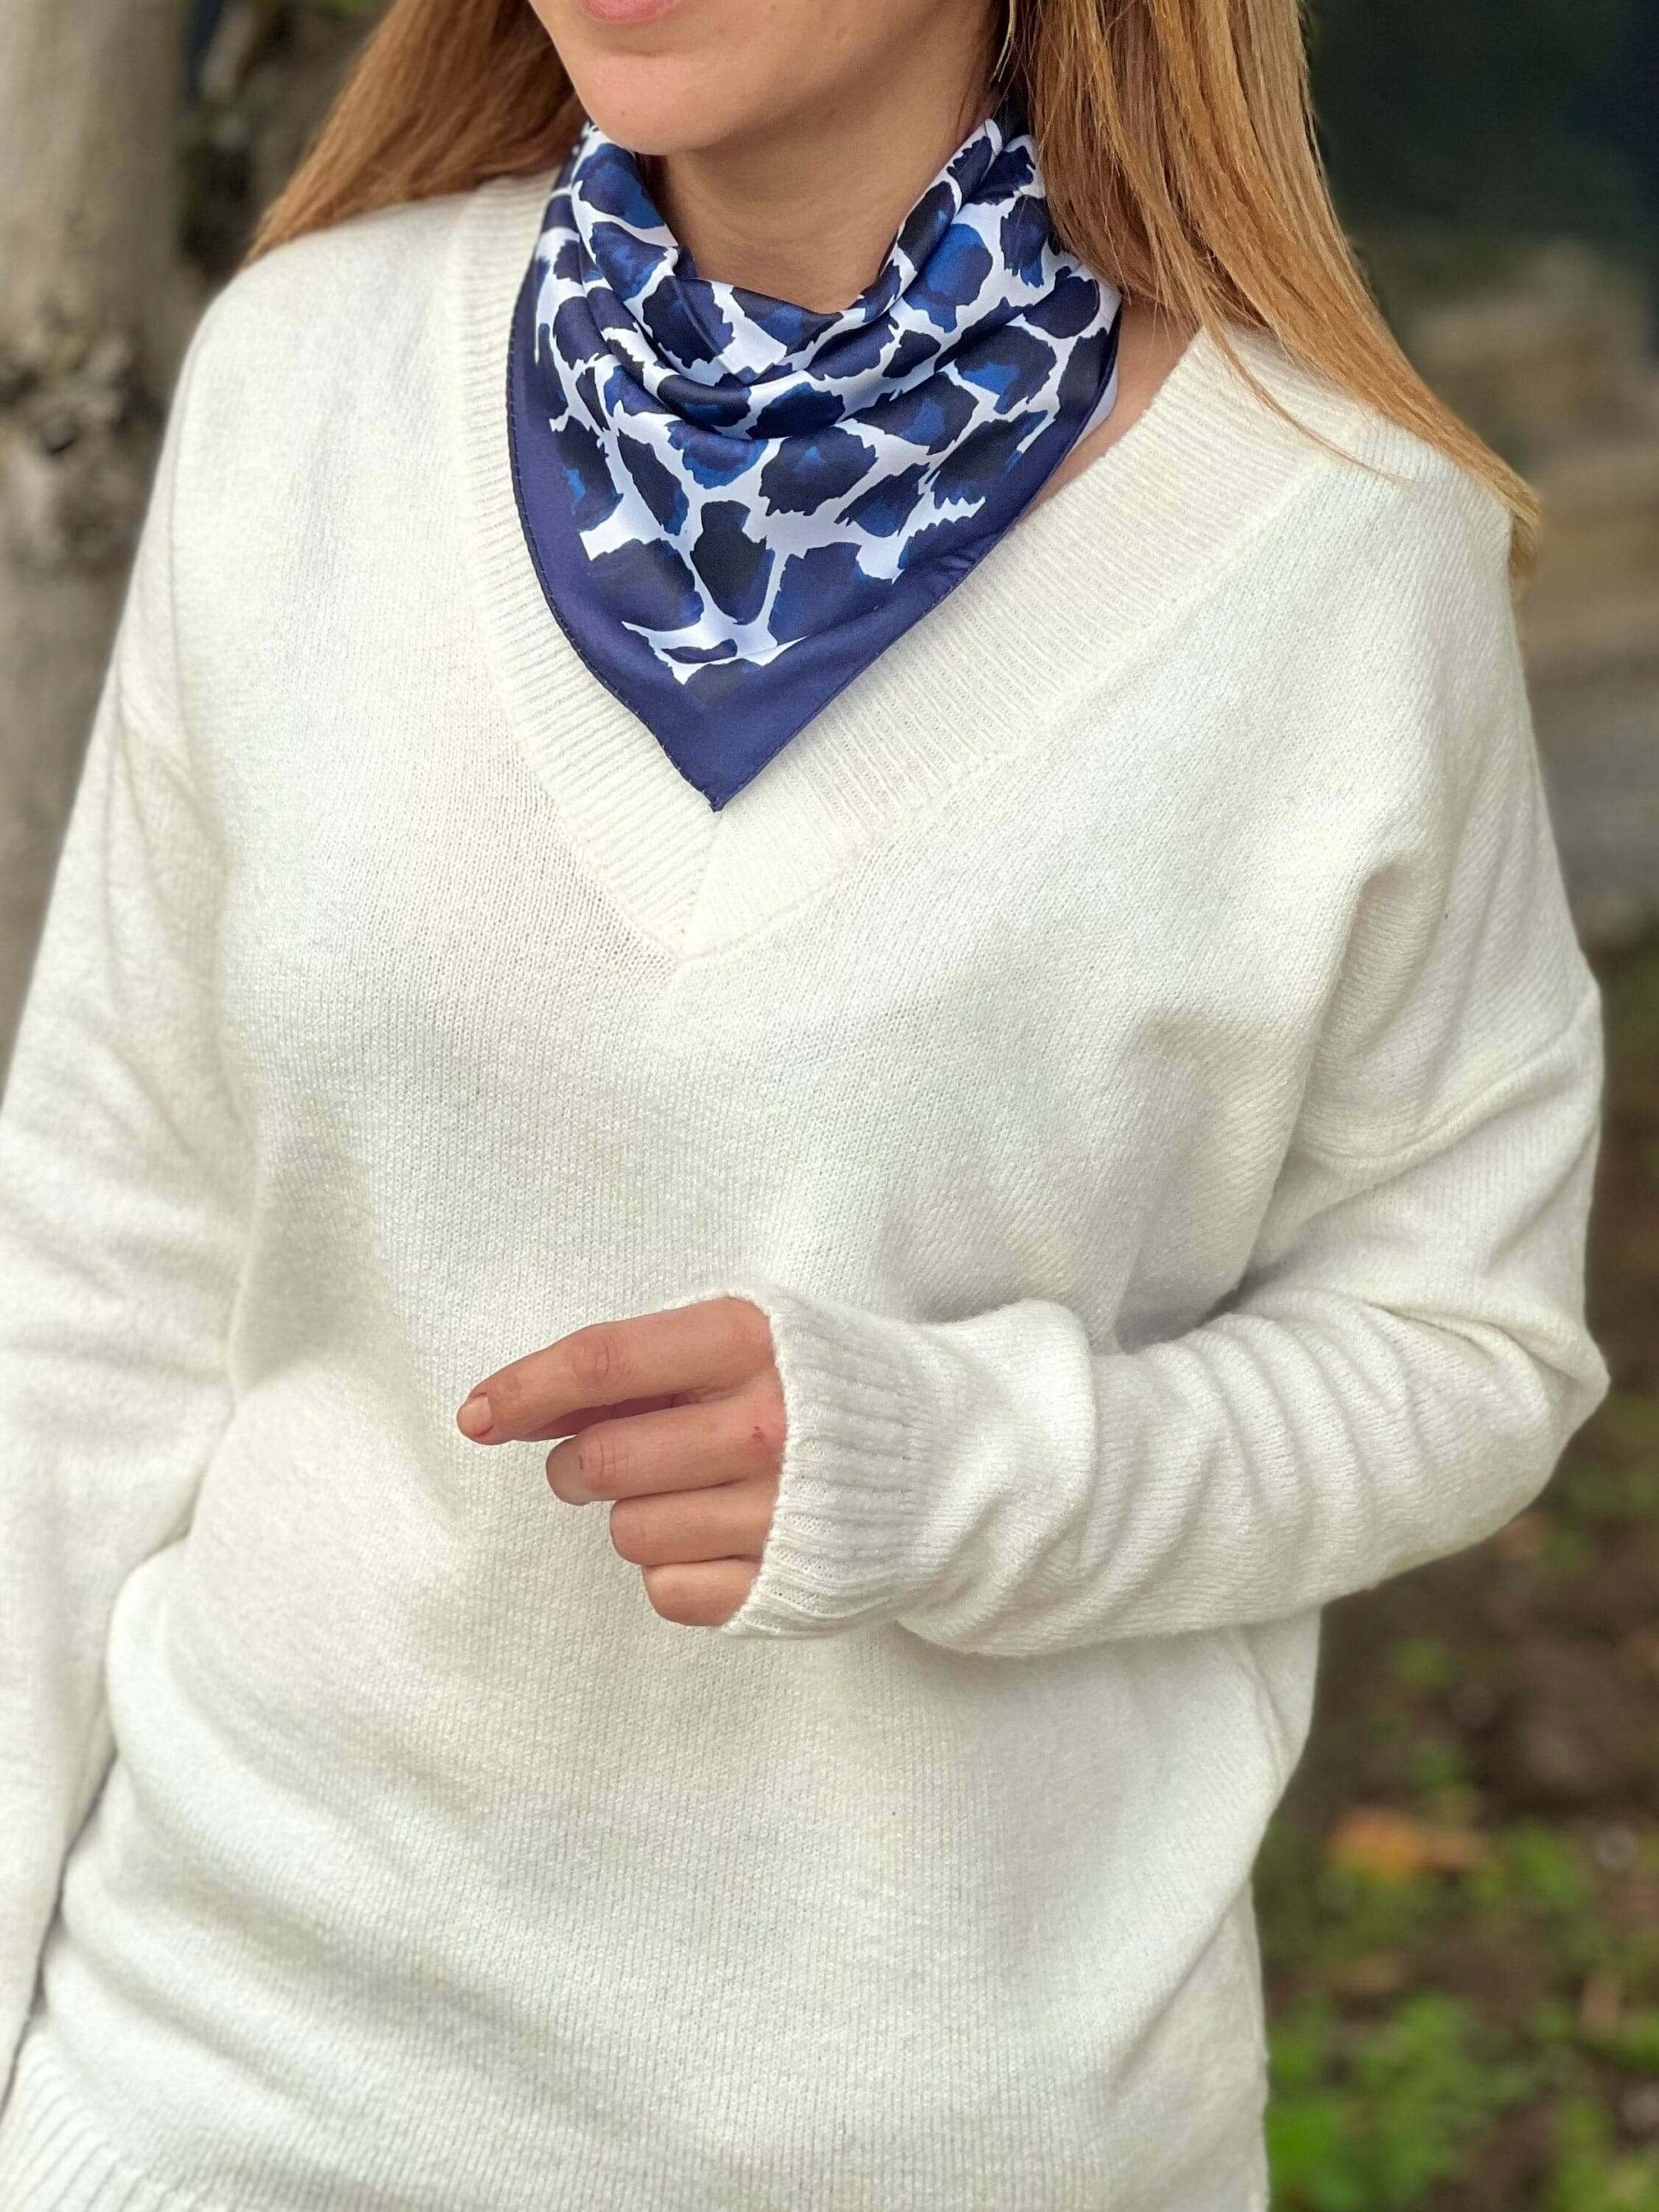 Stay on-trend with this must-have satin scarf, featuring a bold blue leopard pattern and versatile design.